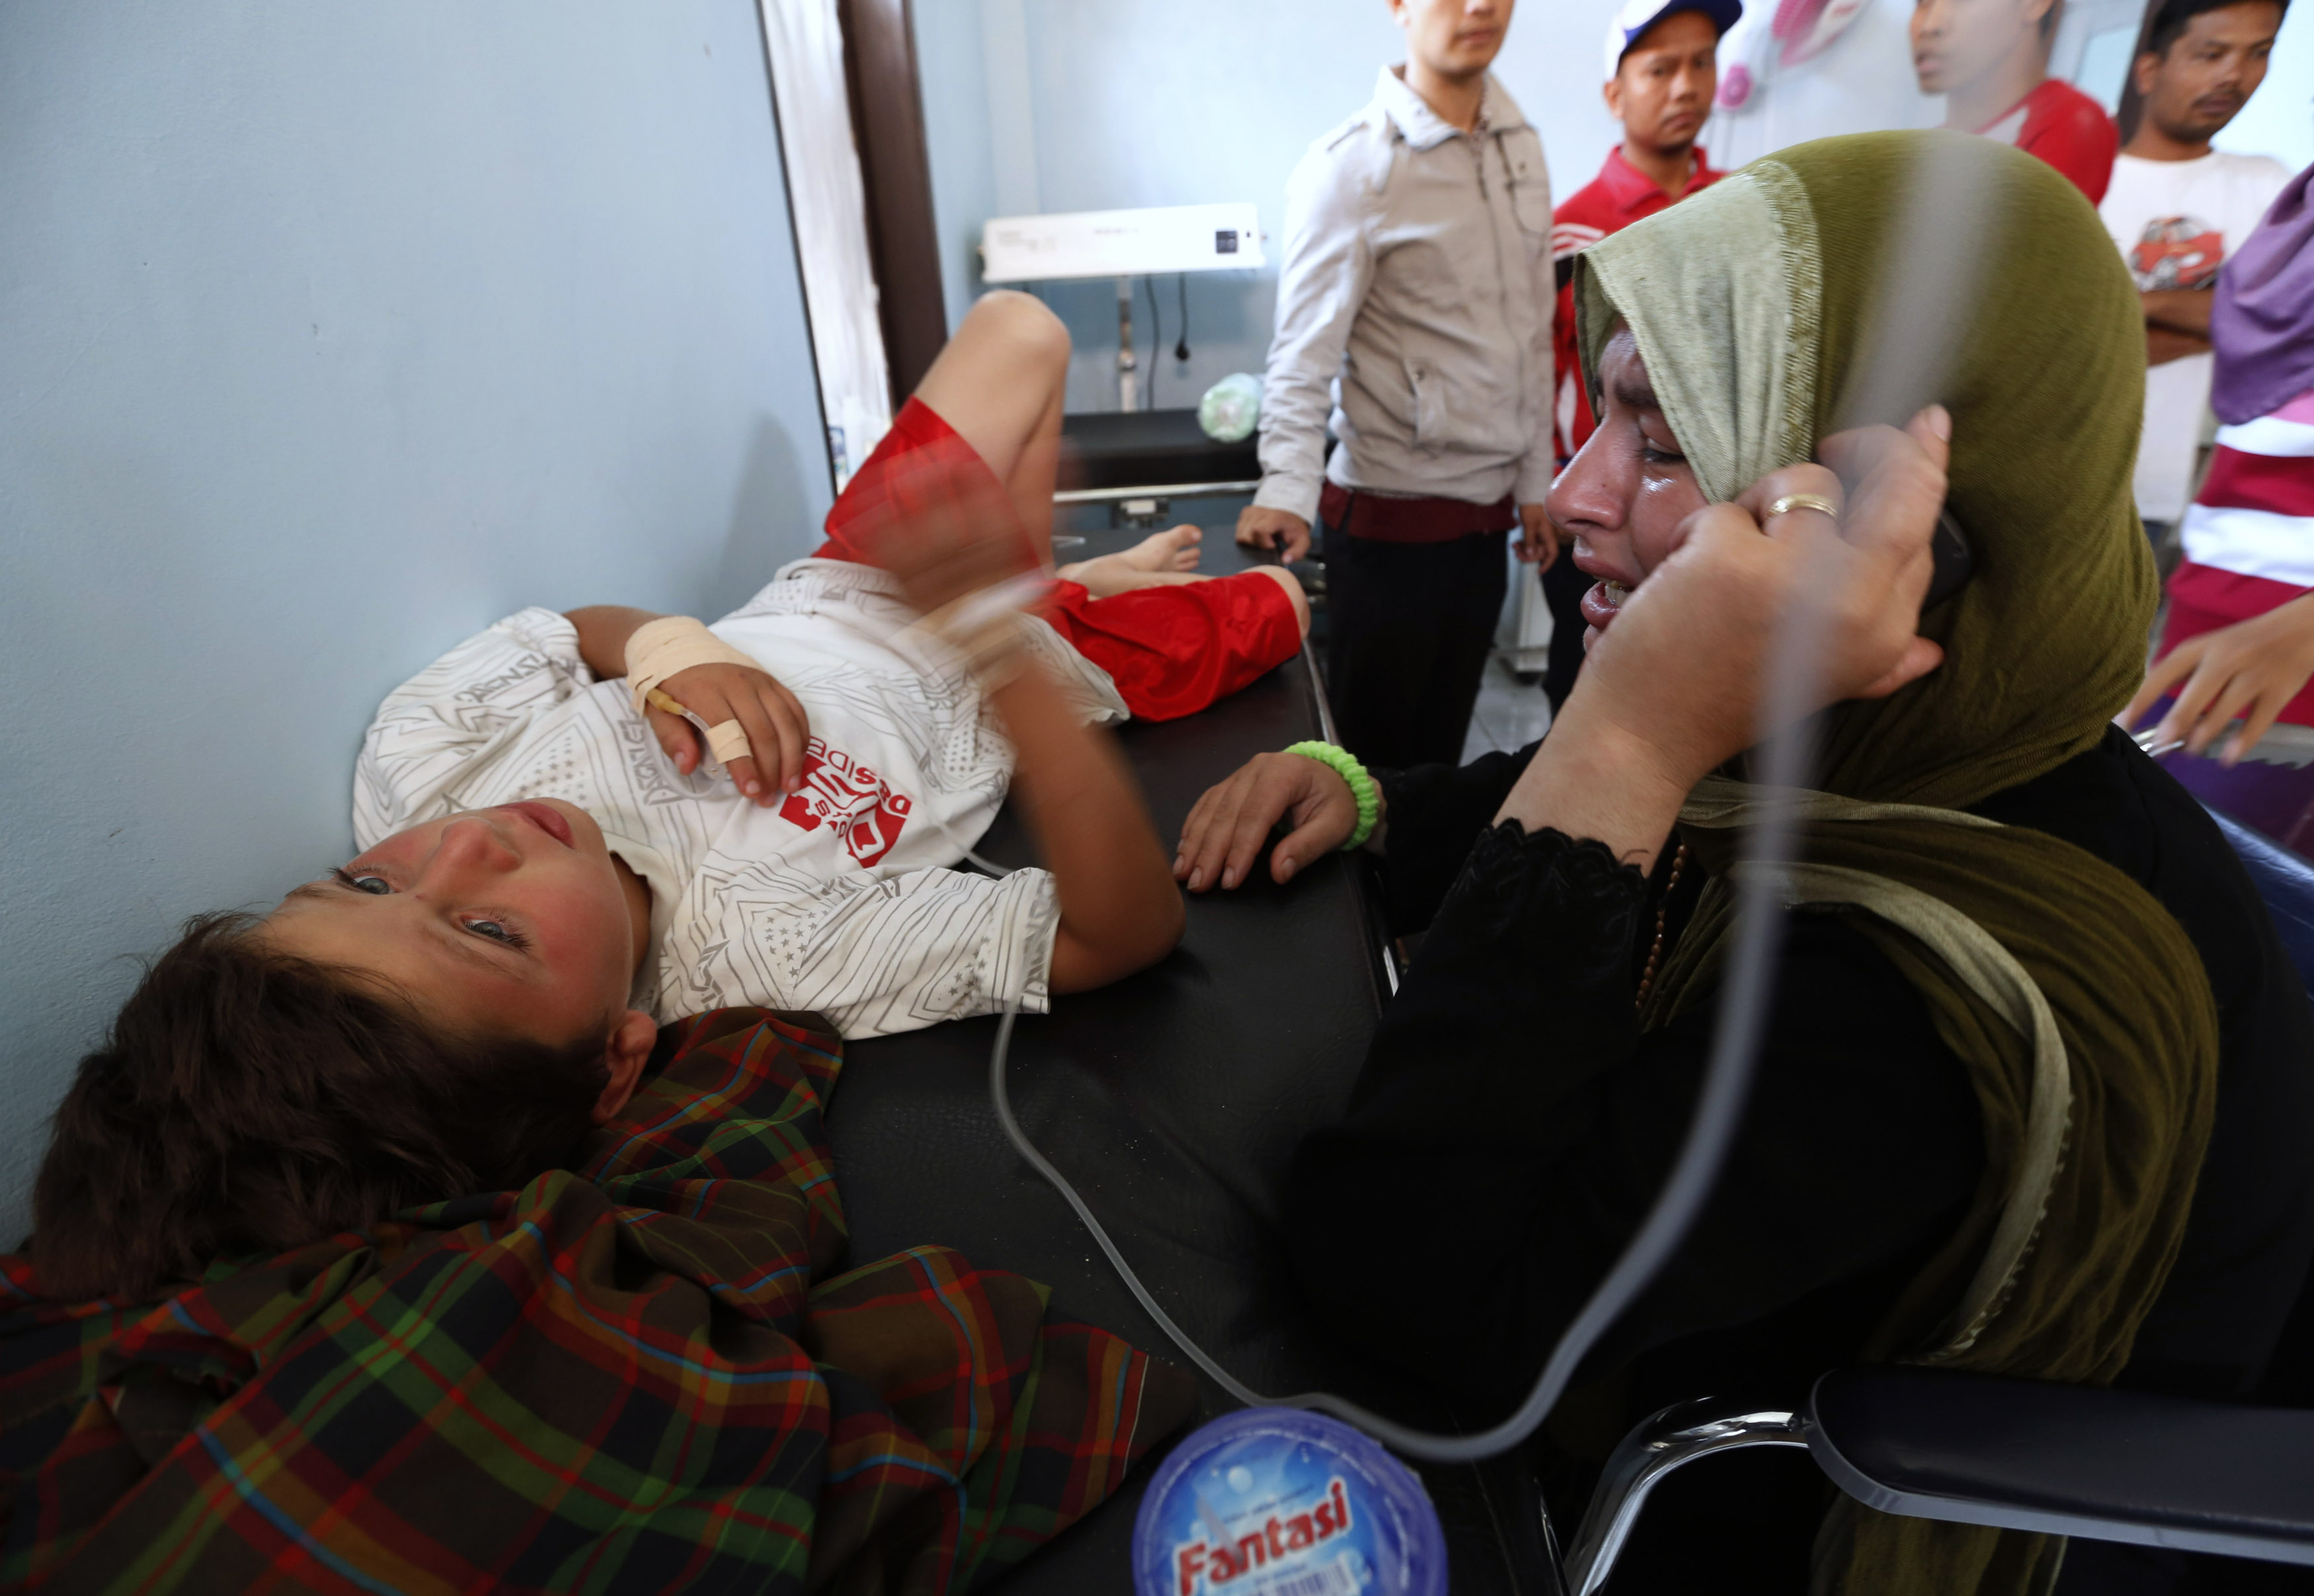 Nadine Bakour, a Lebanese woman who lost her husband and two sons in the boat sinking, cries next to her son Khalil el Rahi at Agrabinta health clinic in Indonesia's West Java province. Photo: Reuters